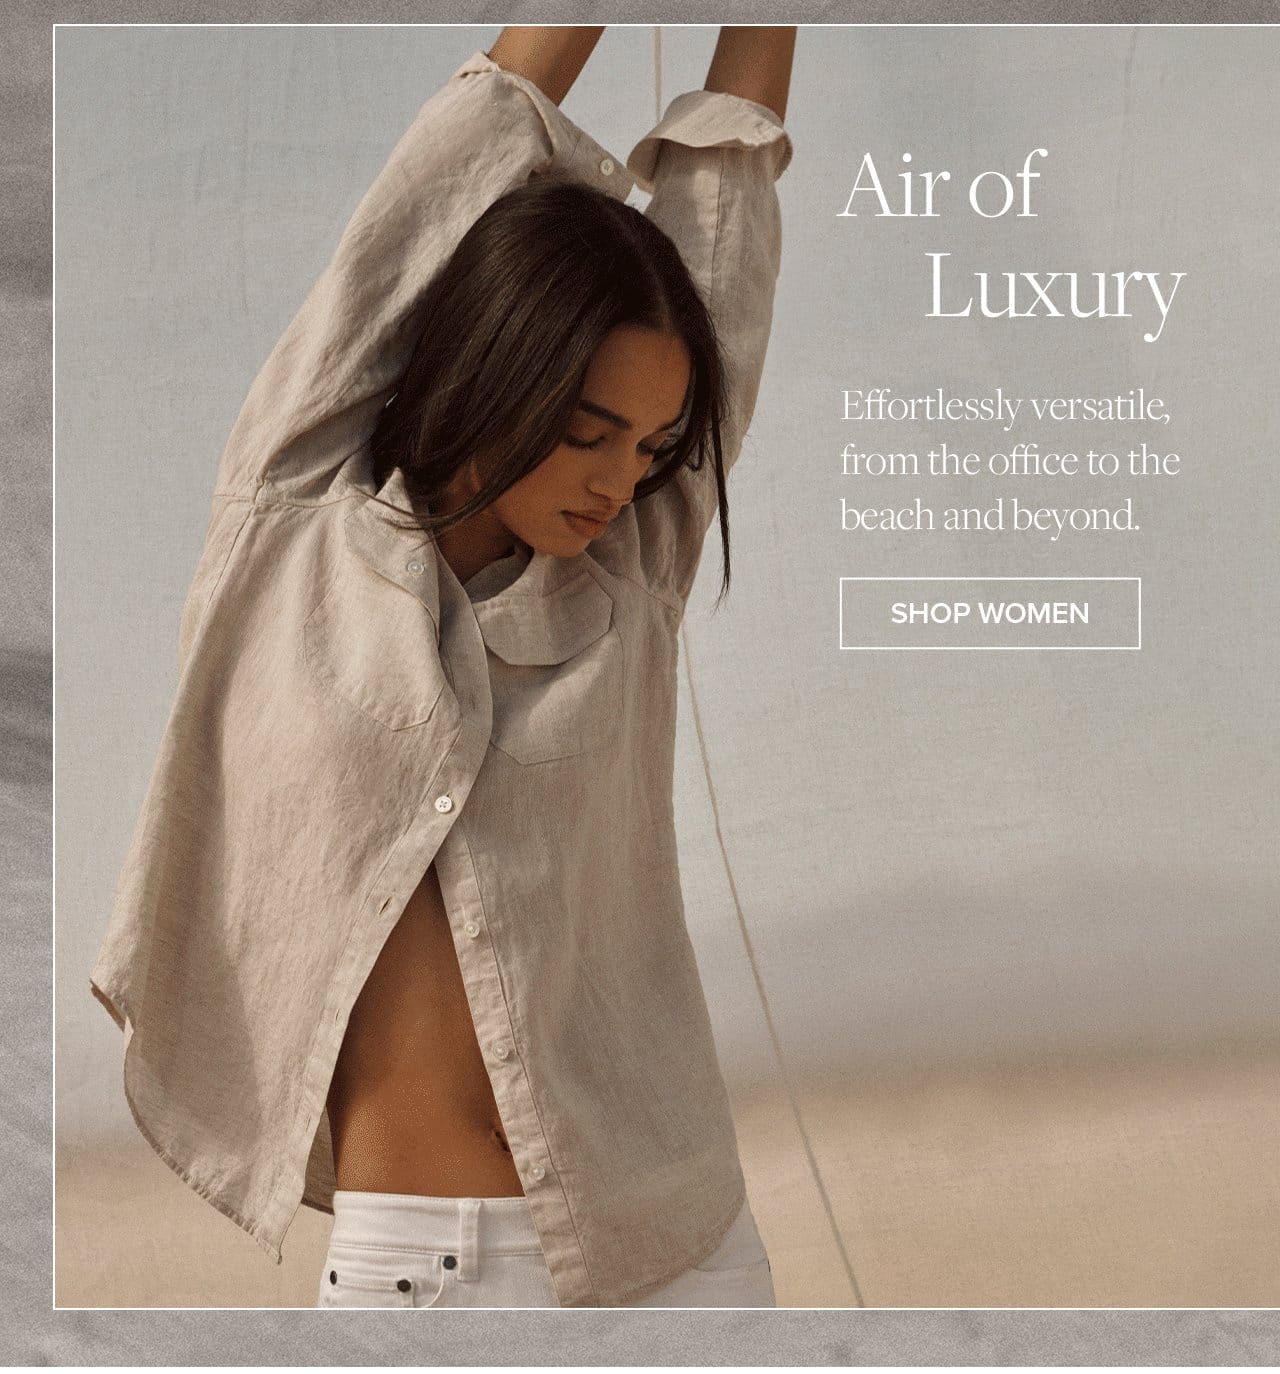 Air of Luxury. Effortlessly versatile, from the office to the beach and beyond. Shop Women